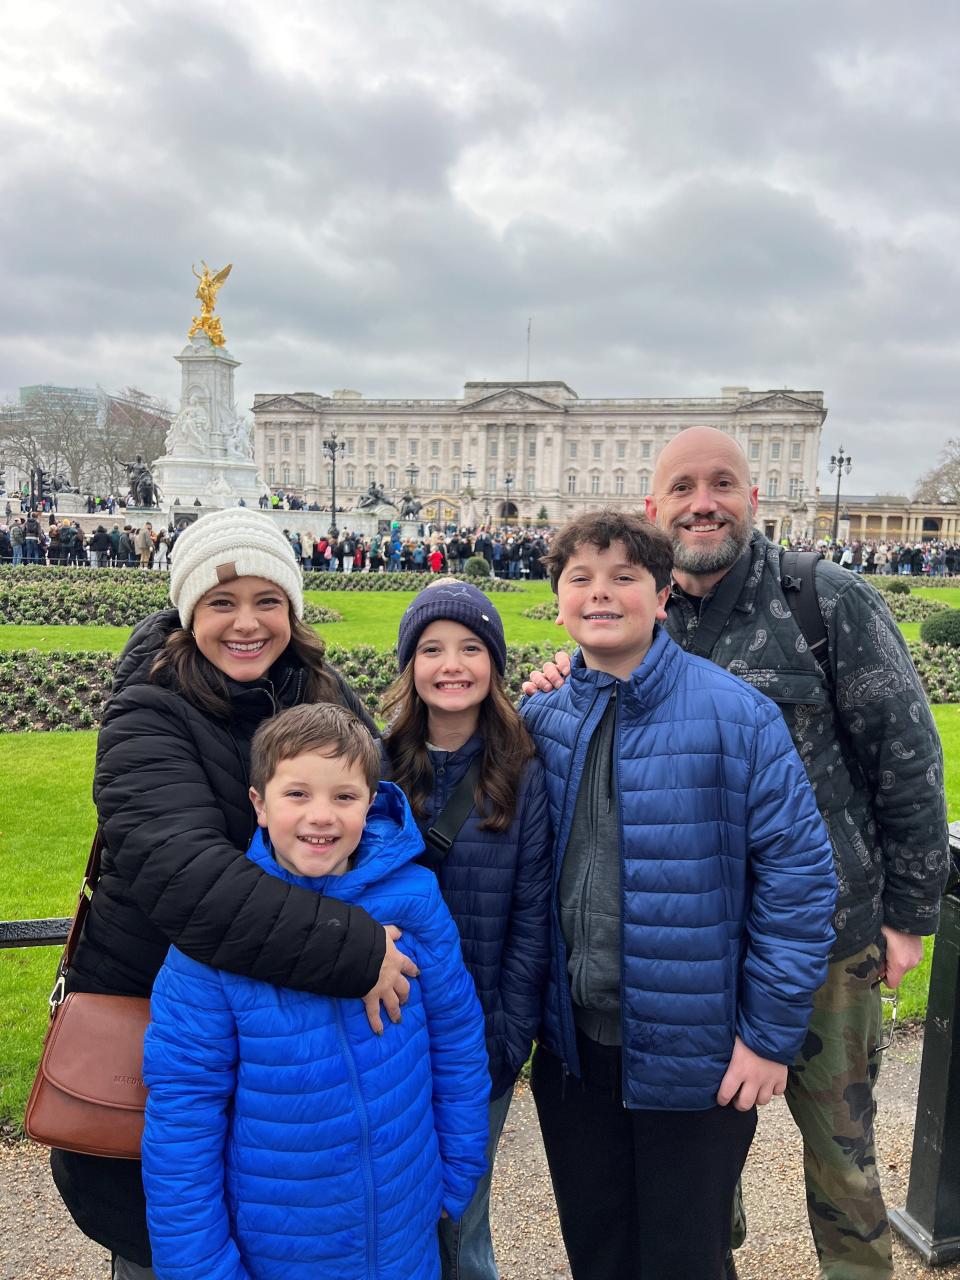 Jessica and Matthew Turner and their three children together during a vacation in London together in January 2024 -- about four years after the couple divorced. From left to right, Jessica, Ezra, 9, Adeline, 12, Elias, 15, and Matthew Turner